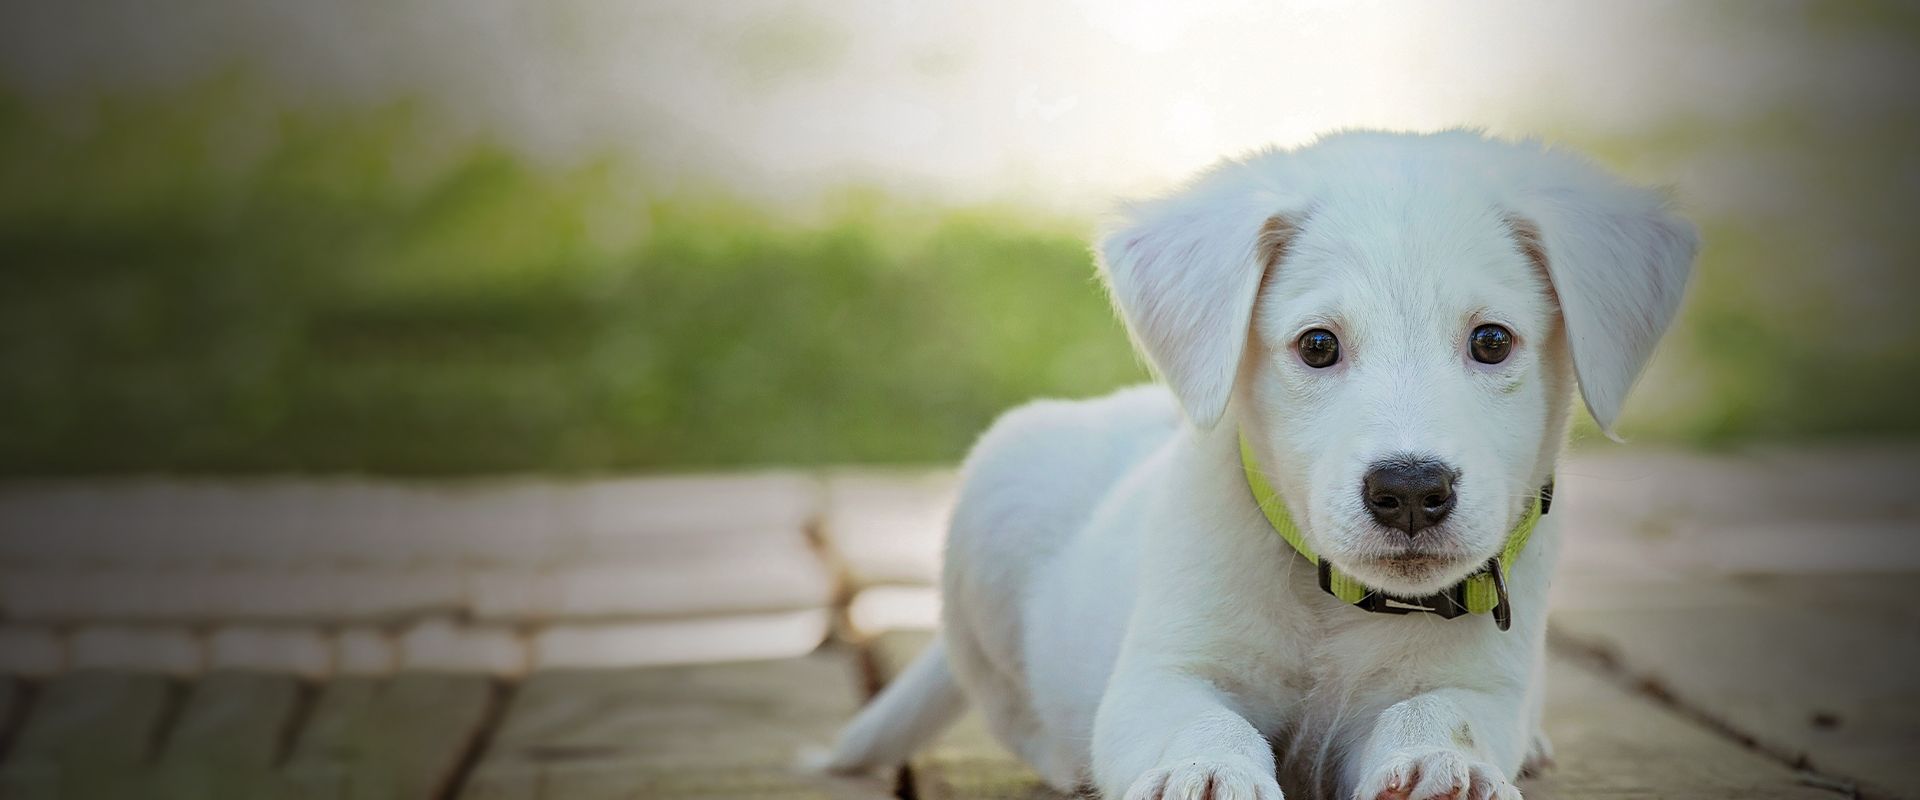 white puppy lying down on the ground